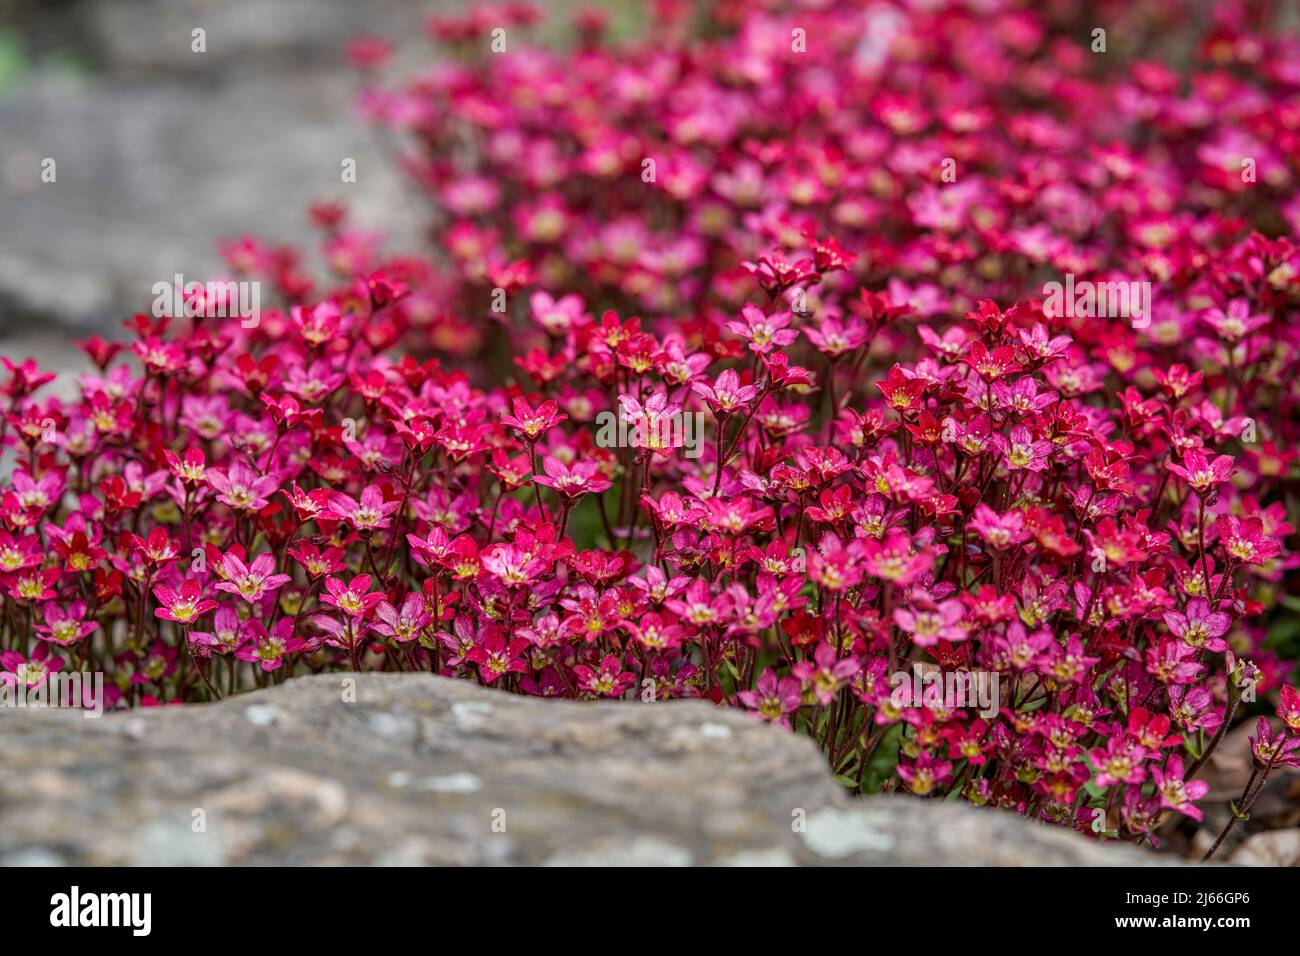 Red pink saxifraga arendsii rockred lush blossom Stock Photo